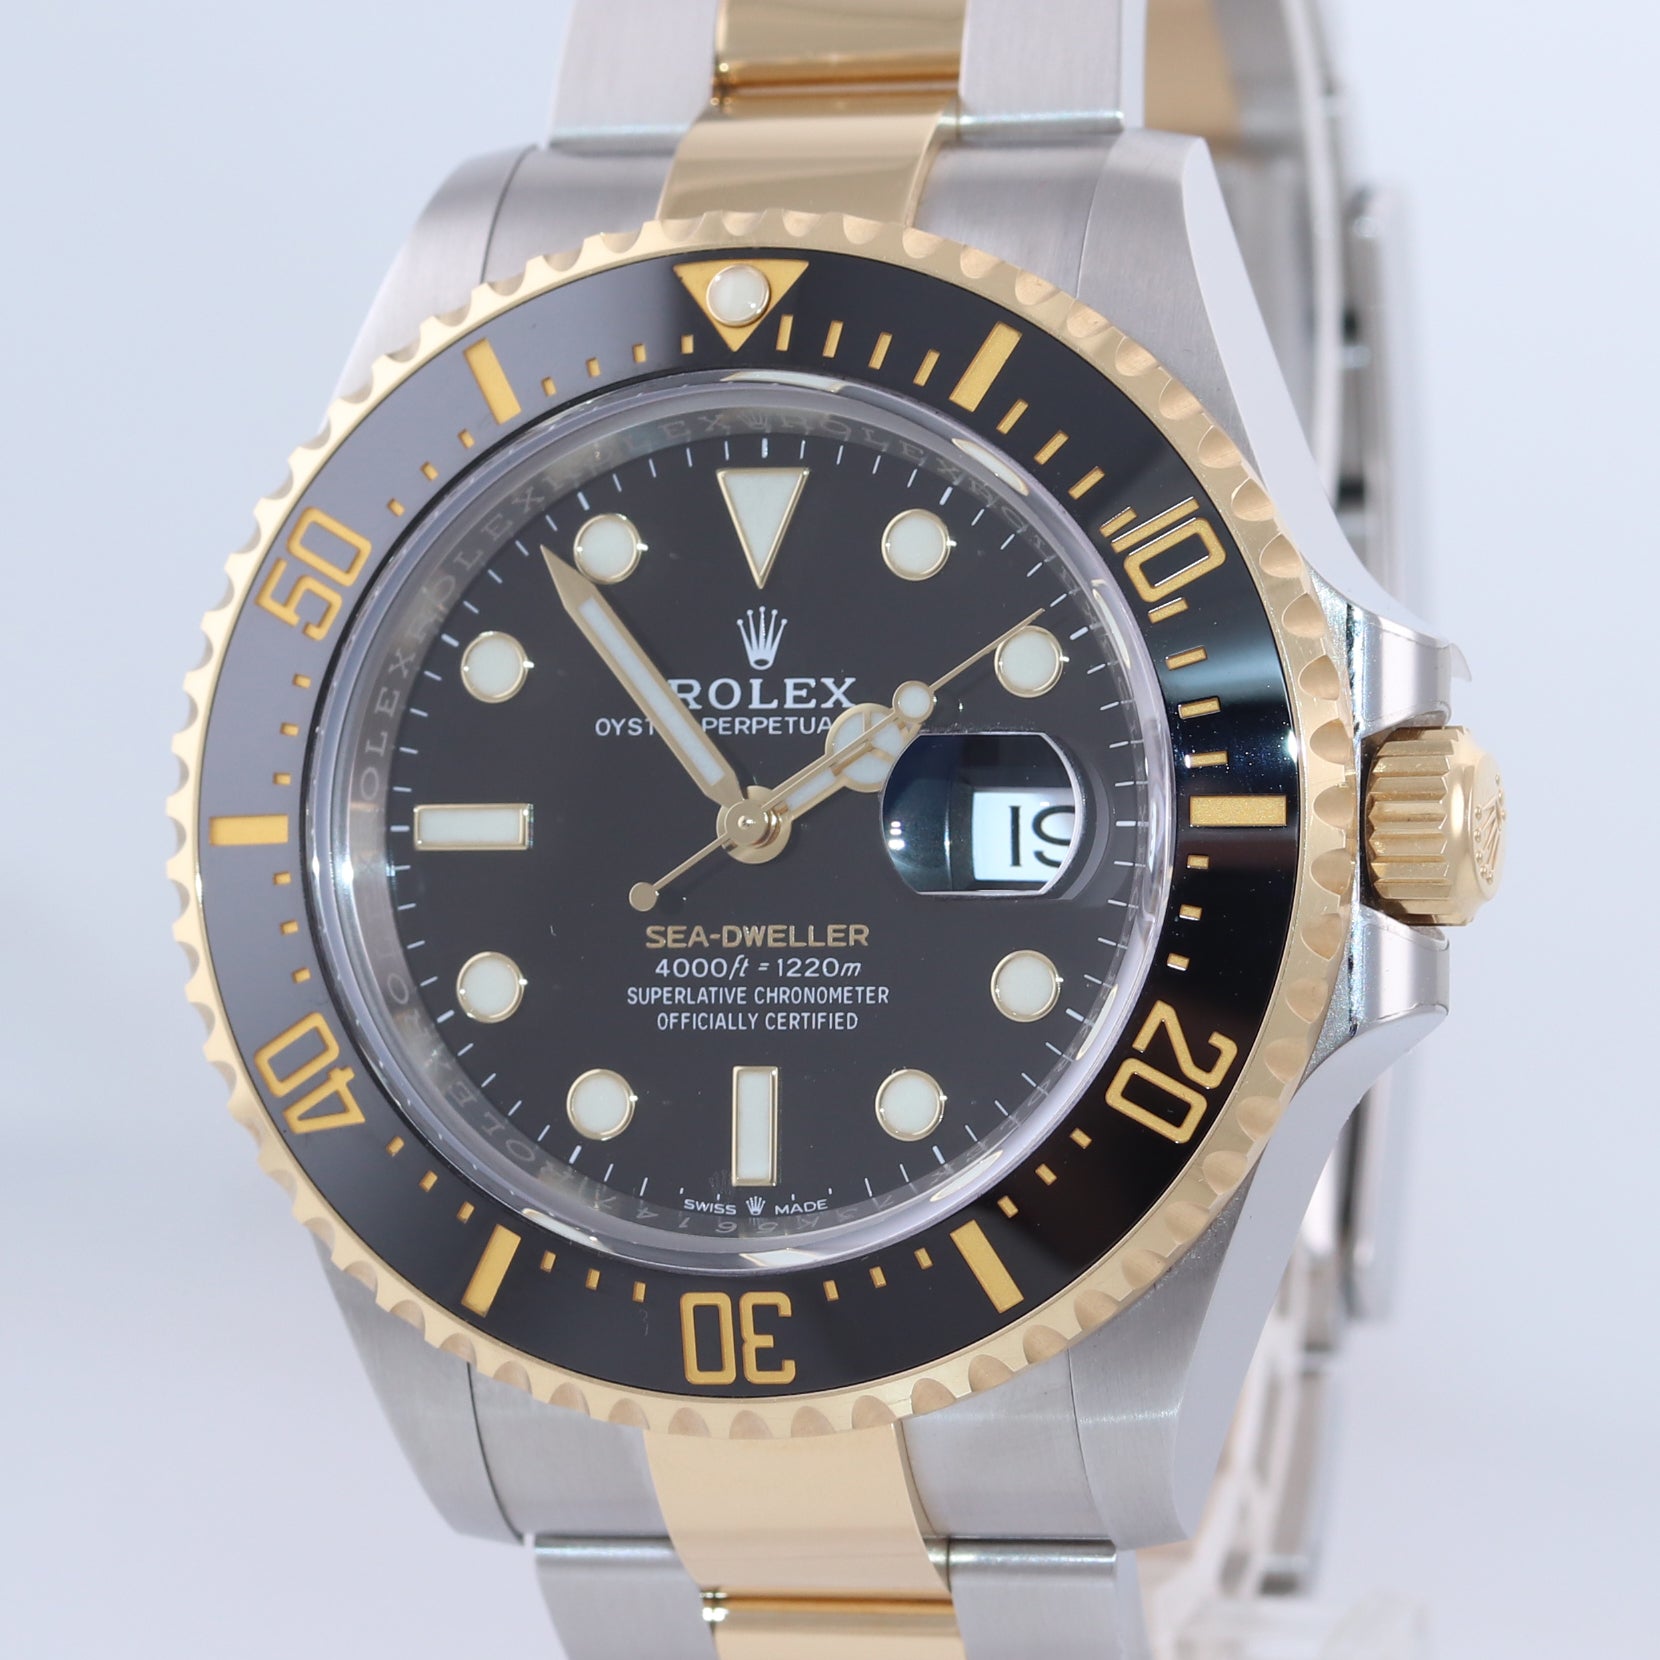 PAPERS MINT 2019 Rolex Sea-Dweller 43mm Two-Tone 18k Yellow Gold Watch 126603